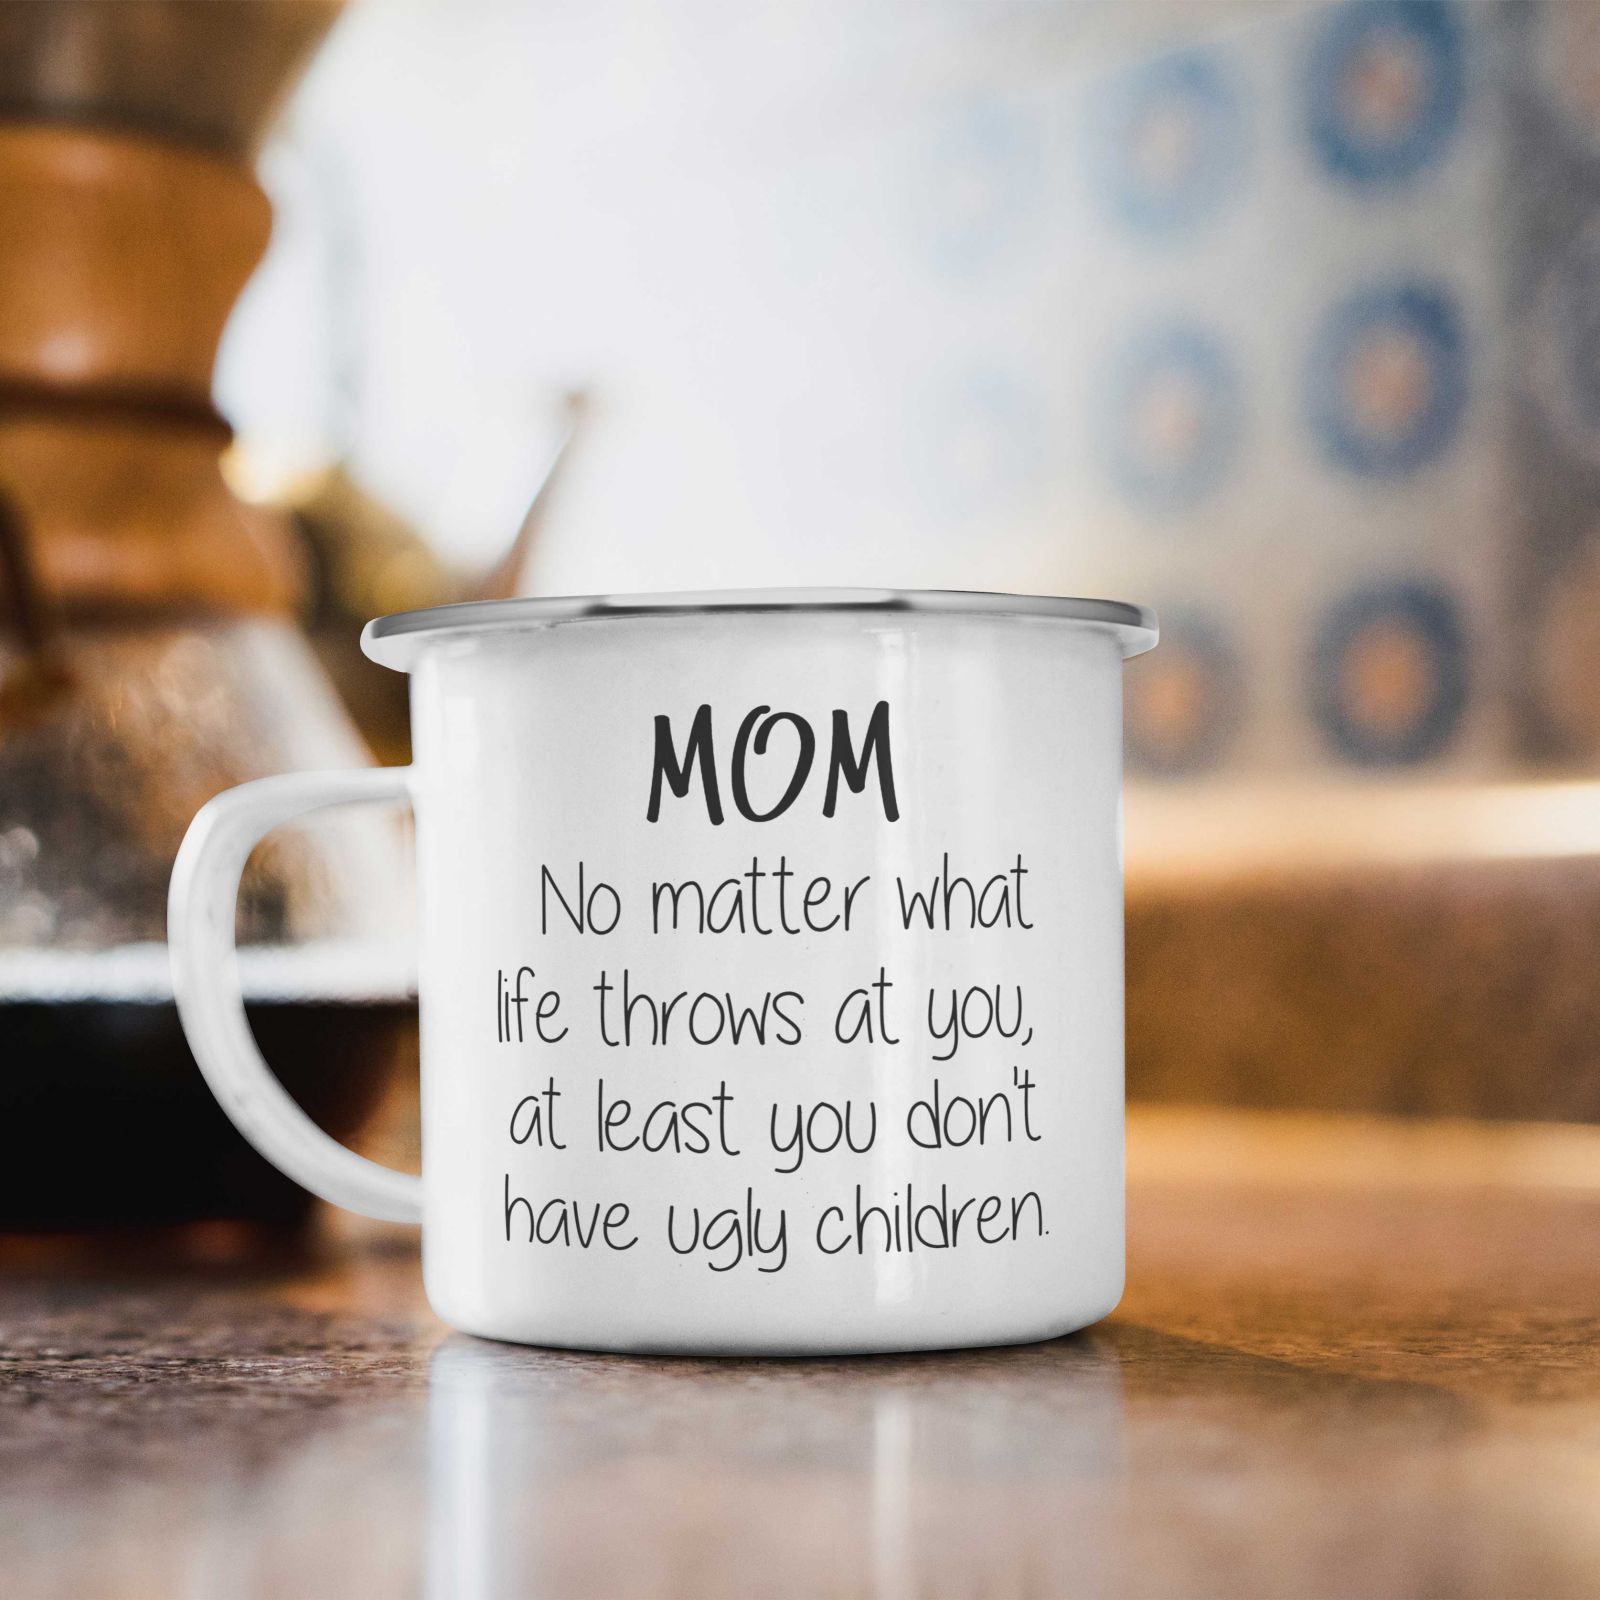 Funny Mom Gifts, Gift From Daughter, Gifts for Mom, Mother's Day Gift, Funny  Mom Mug, Funny Mom Gift, Mom Mug, Best Mom Ever, Mother Gift 